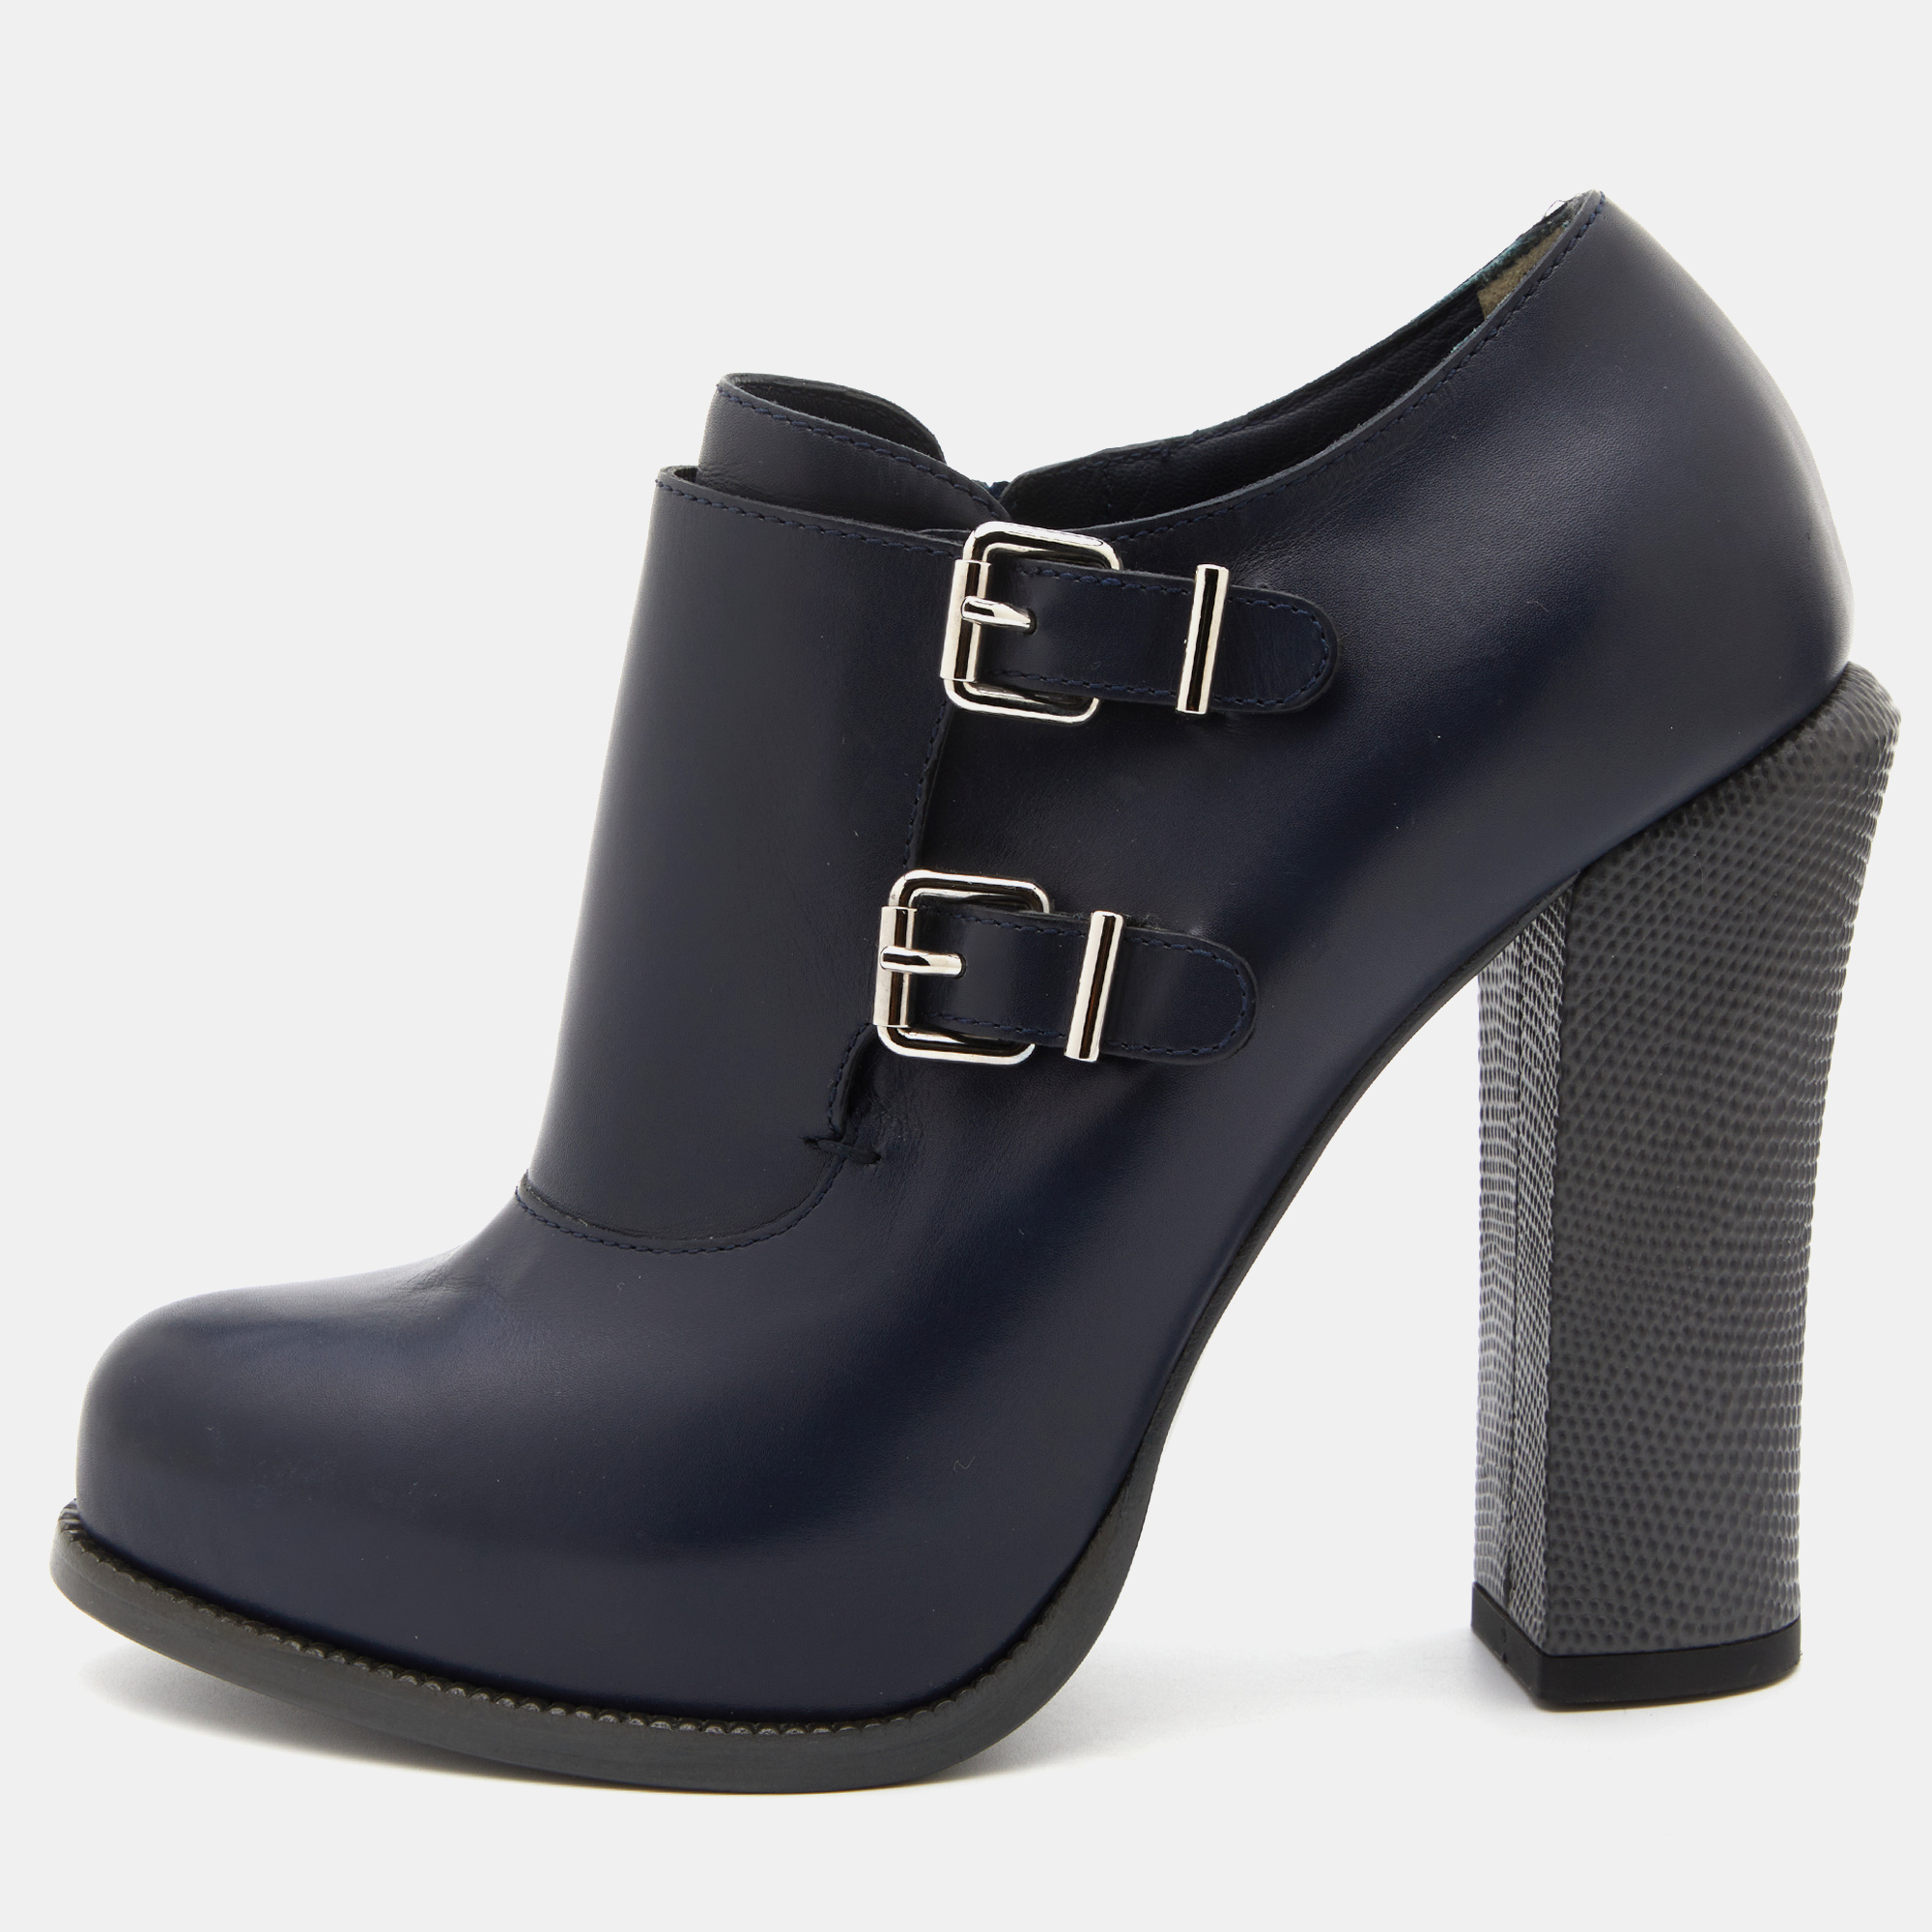 Pre-owned Fendi Navy Blue Leather Buckle Detail Ankle Length Platform Boots Size 38